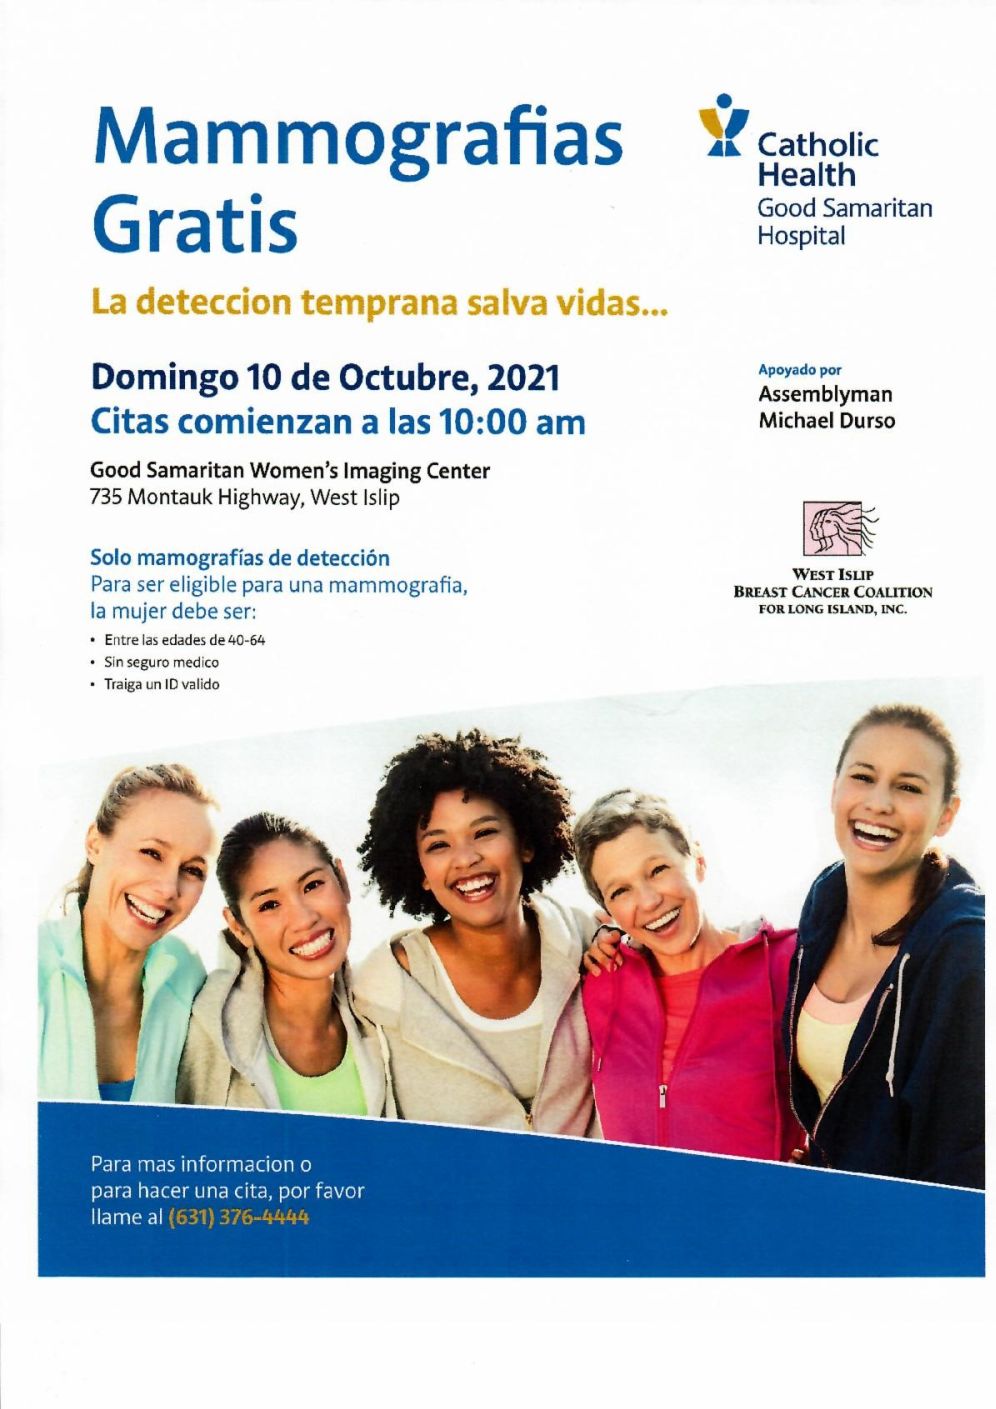 spanish flyer for breast cancer screenings starting at 10am on 10/10 at Good Sam Women's Imaging Center